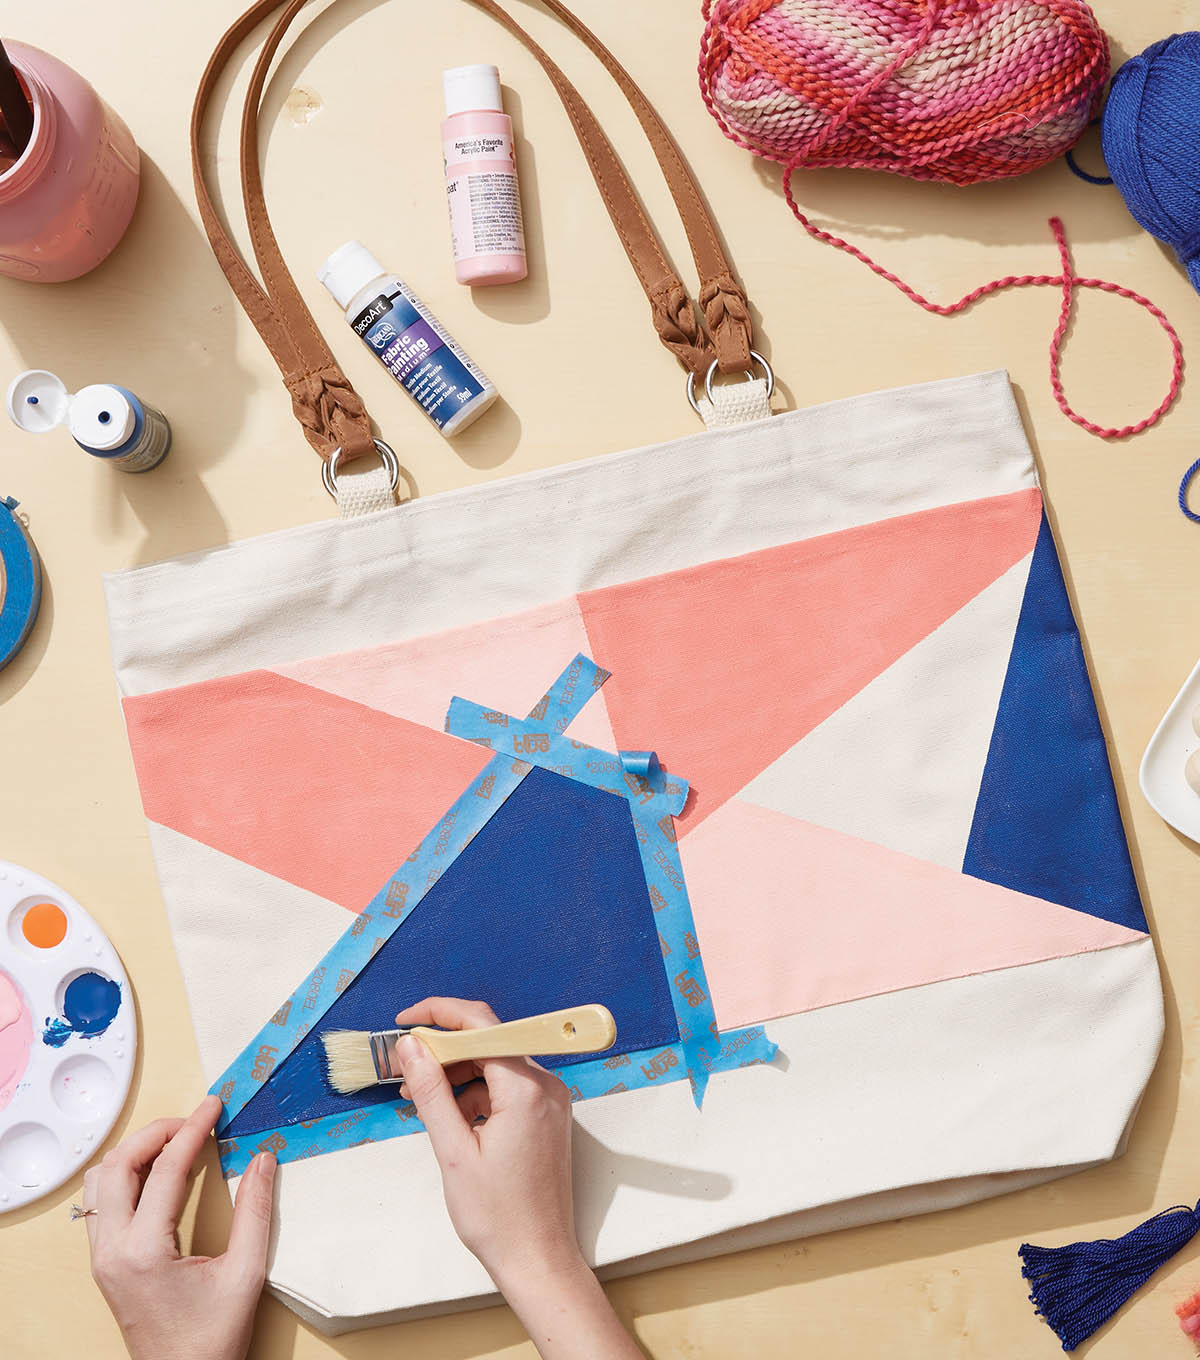 How To Make a Painted Canvas Tote Bag | JOANN